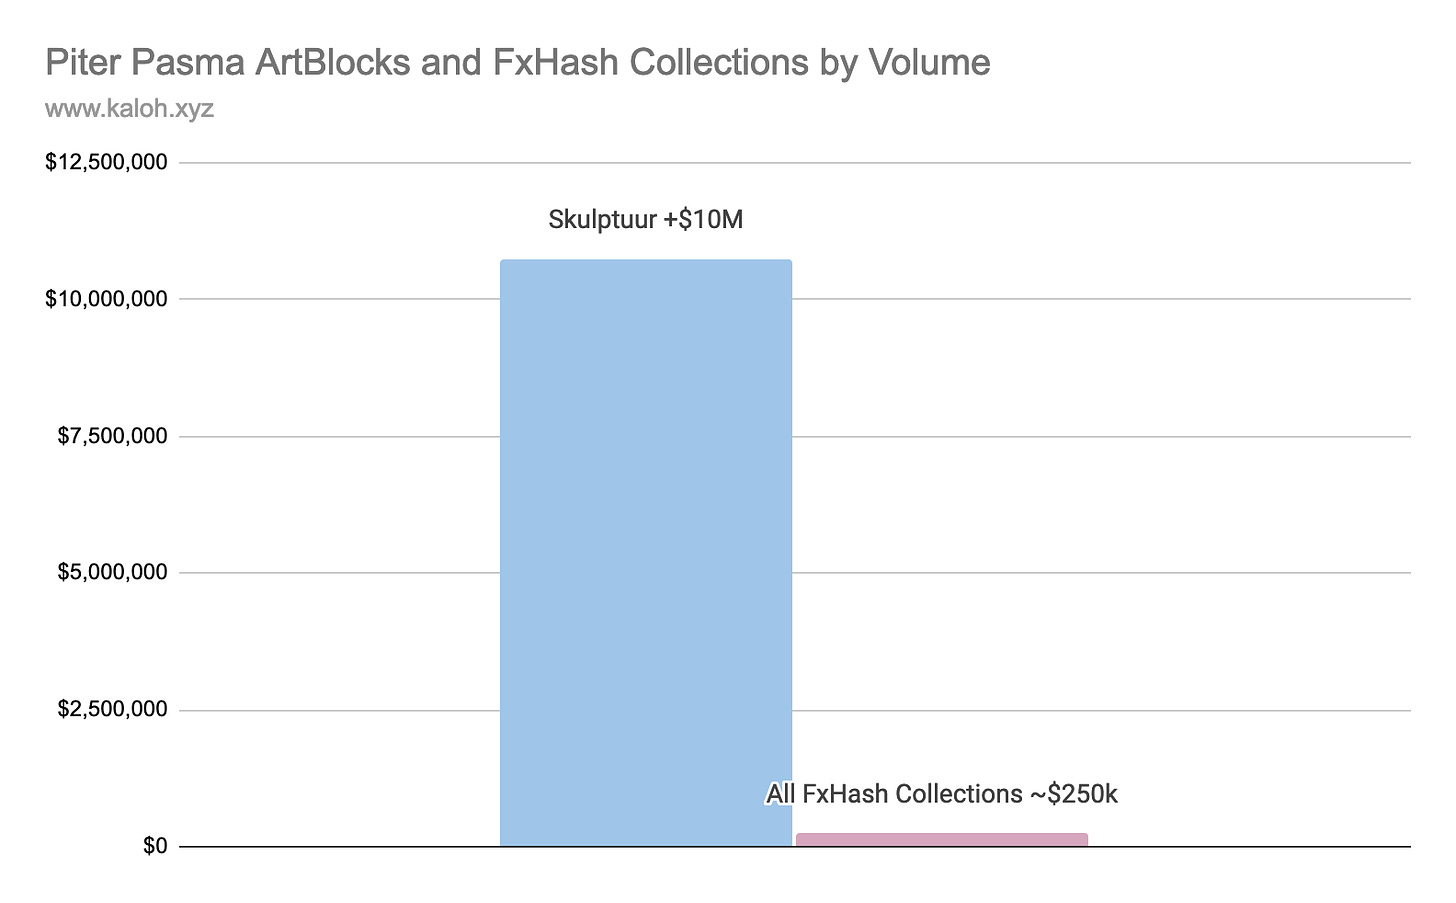 Piter Pasma’s Skulptuur has commanded over $10M in volume, which eclipses the total volume from his FxHash collections (6) by a wide margin.